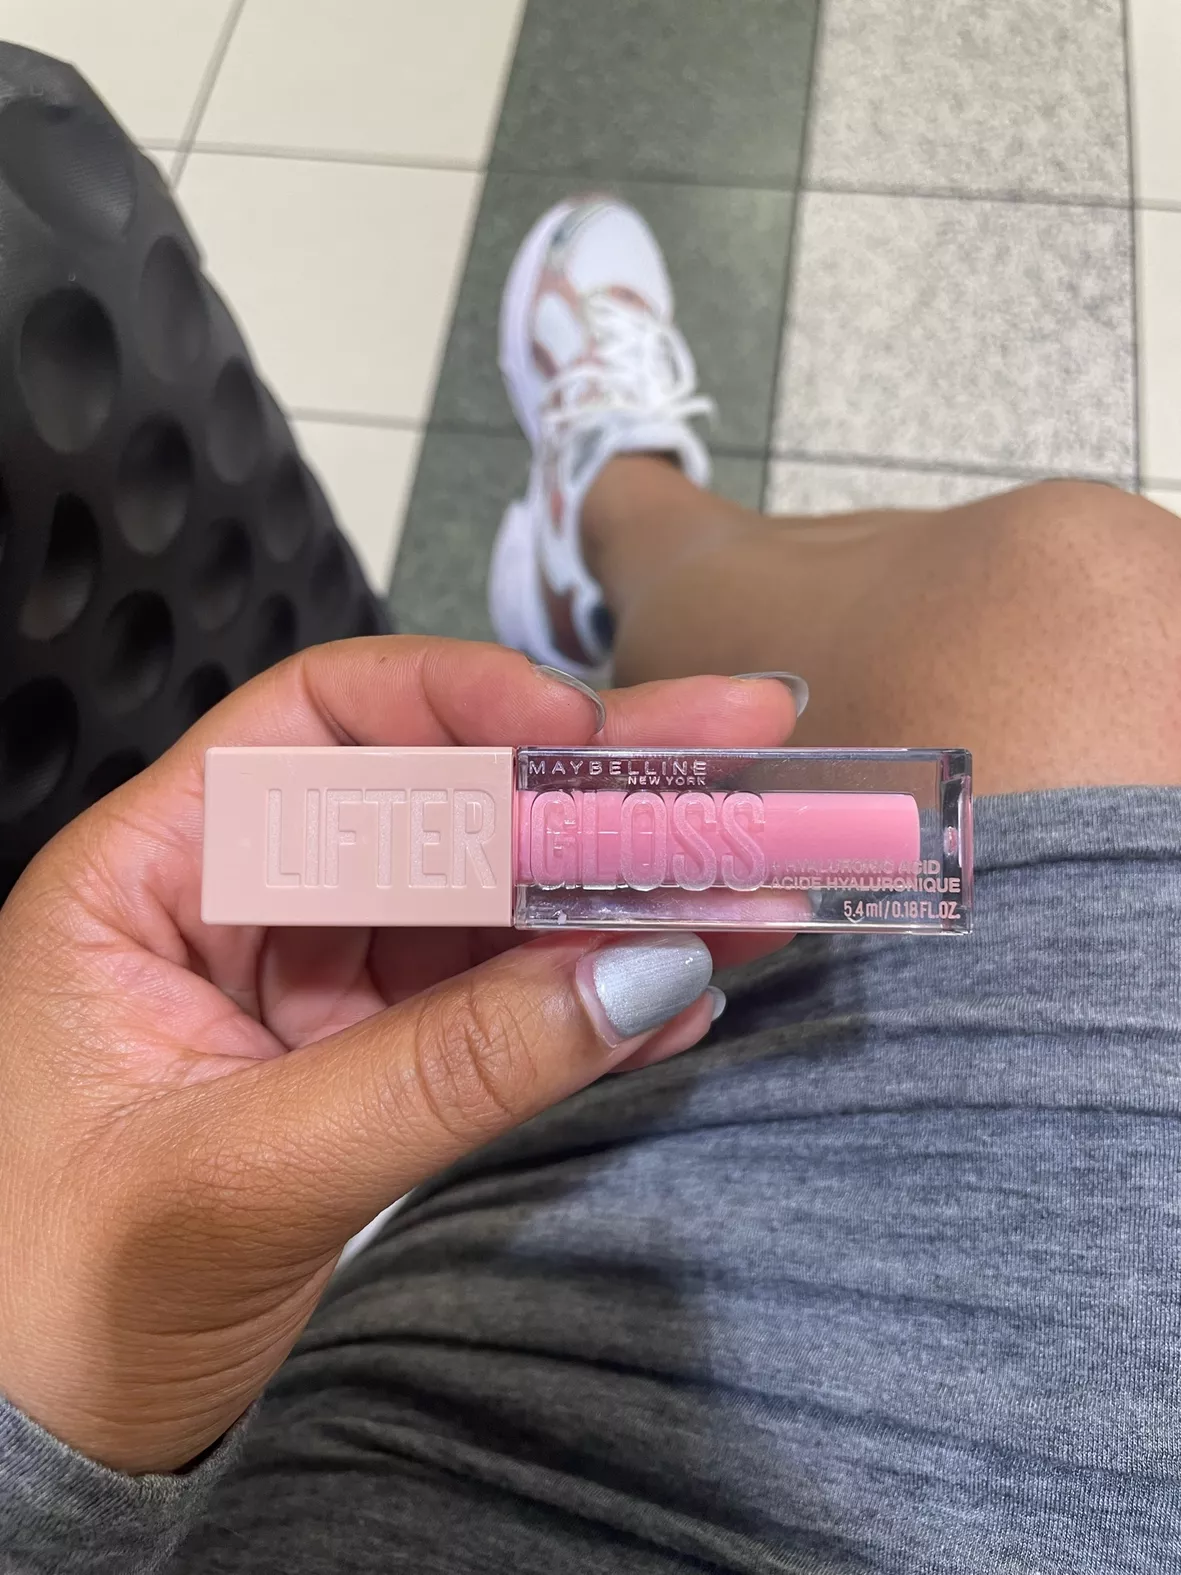 curated … LTK Gloss Lifter York on New Maybelline